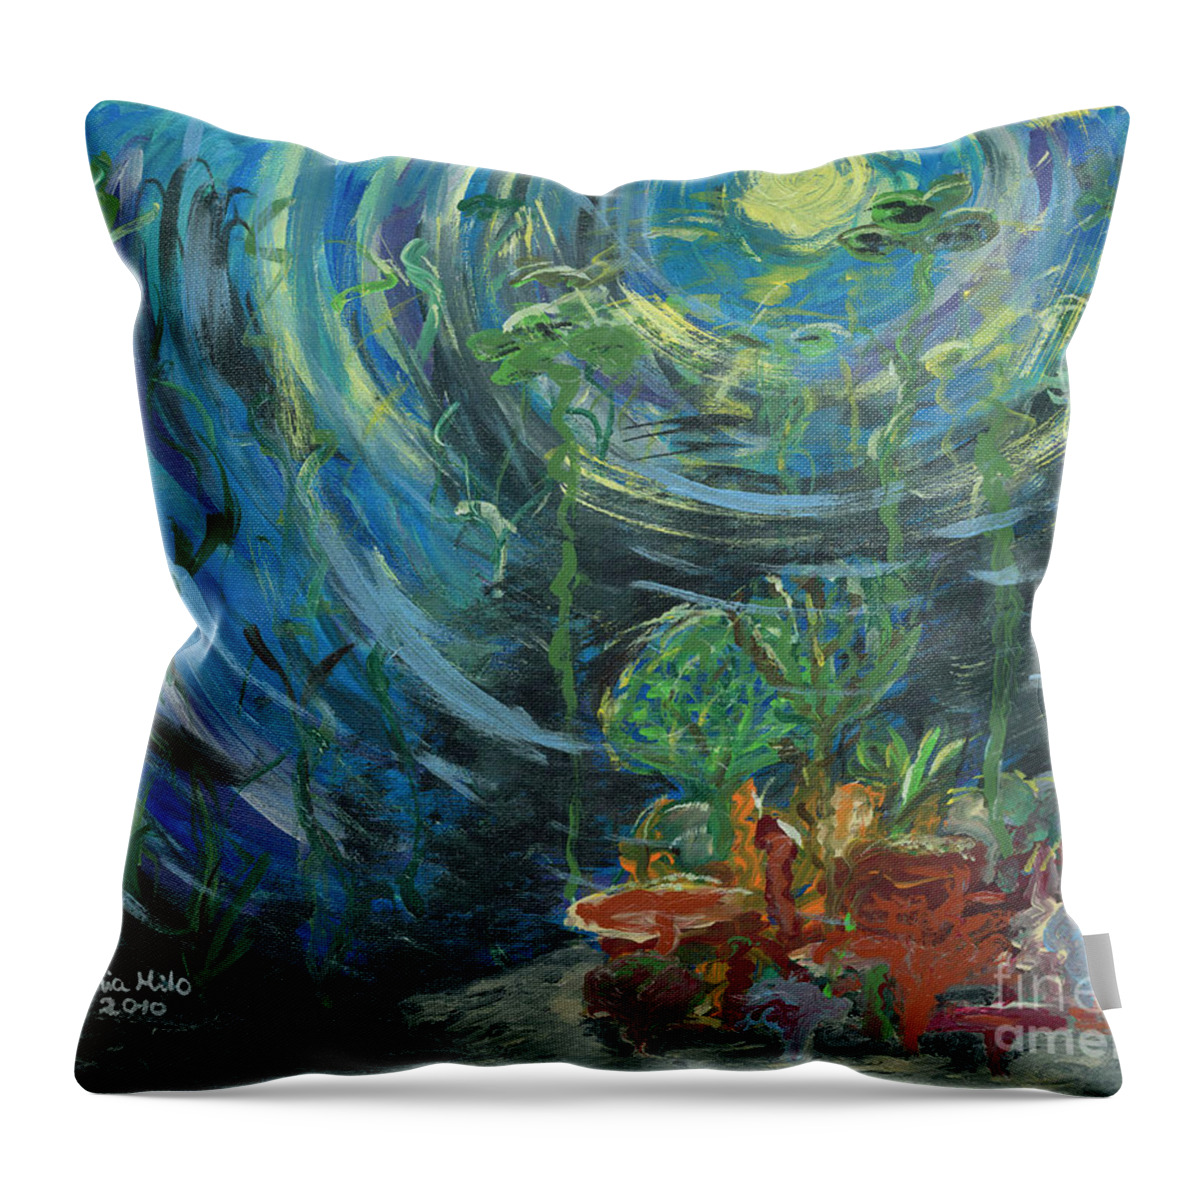  Throw Pillow featuring the painting Into the Deep by Ania M Milo